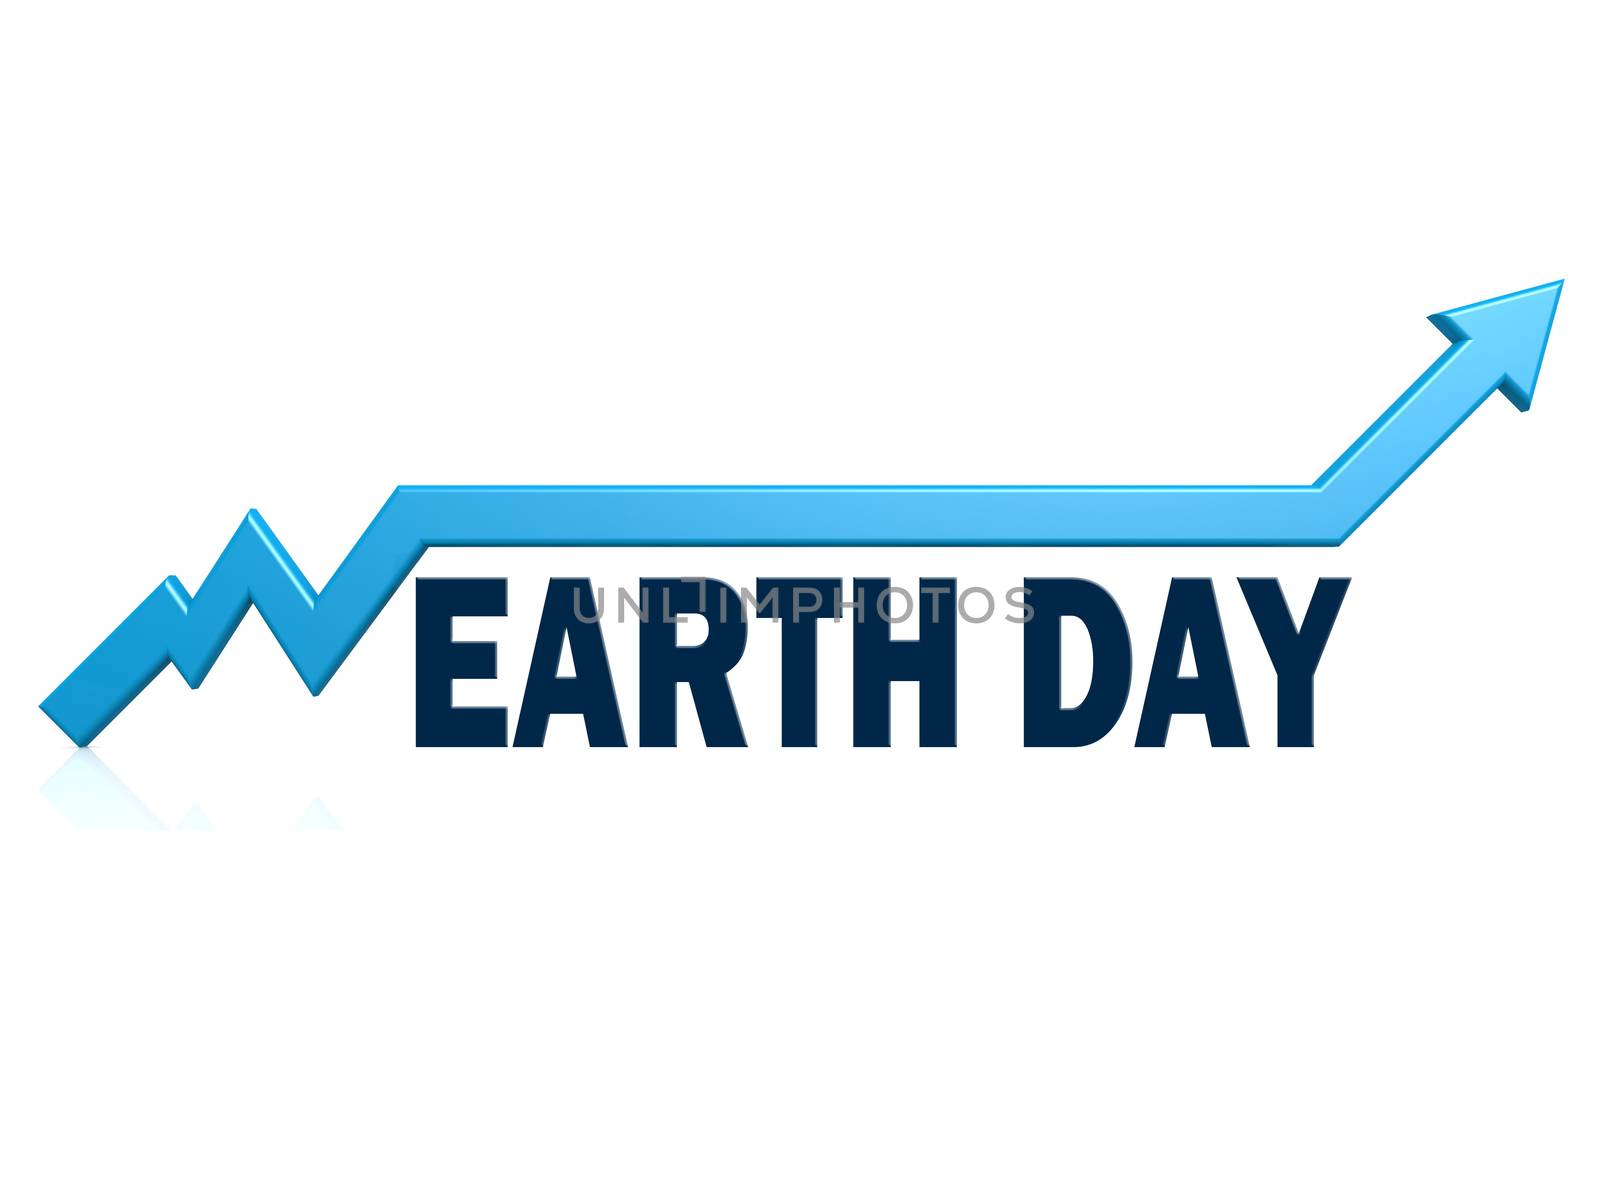 Earth day word with blue grow arrow by tang90246